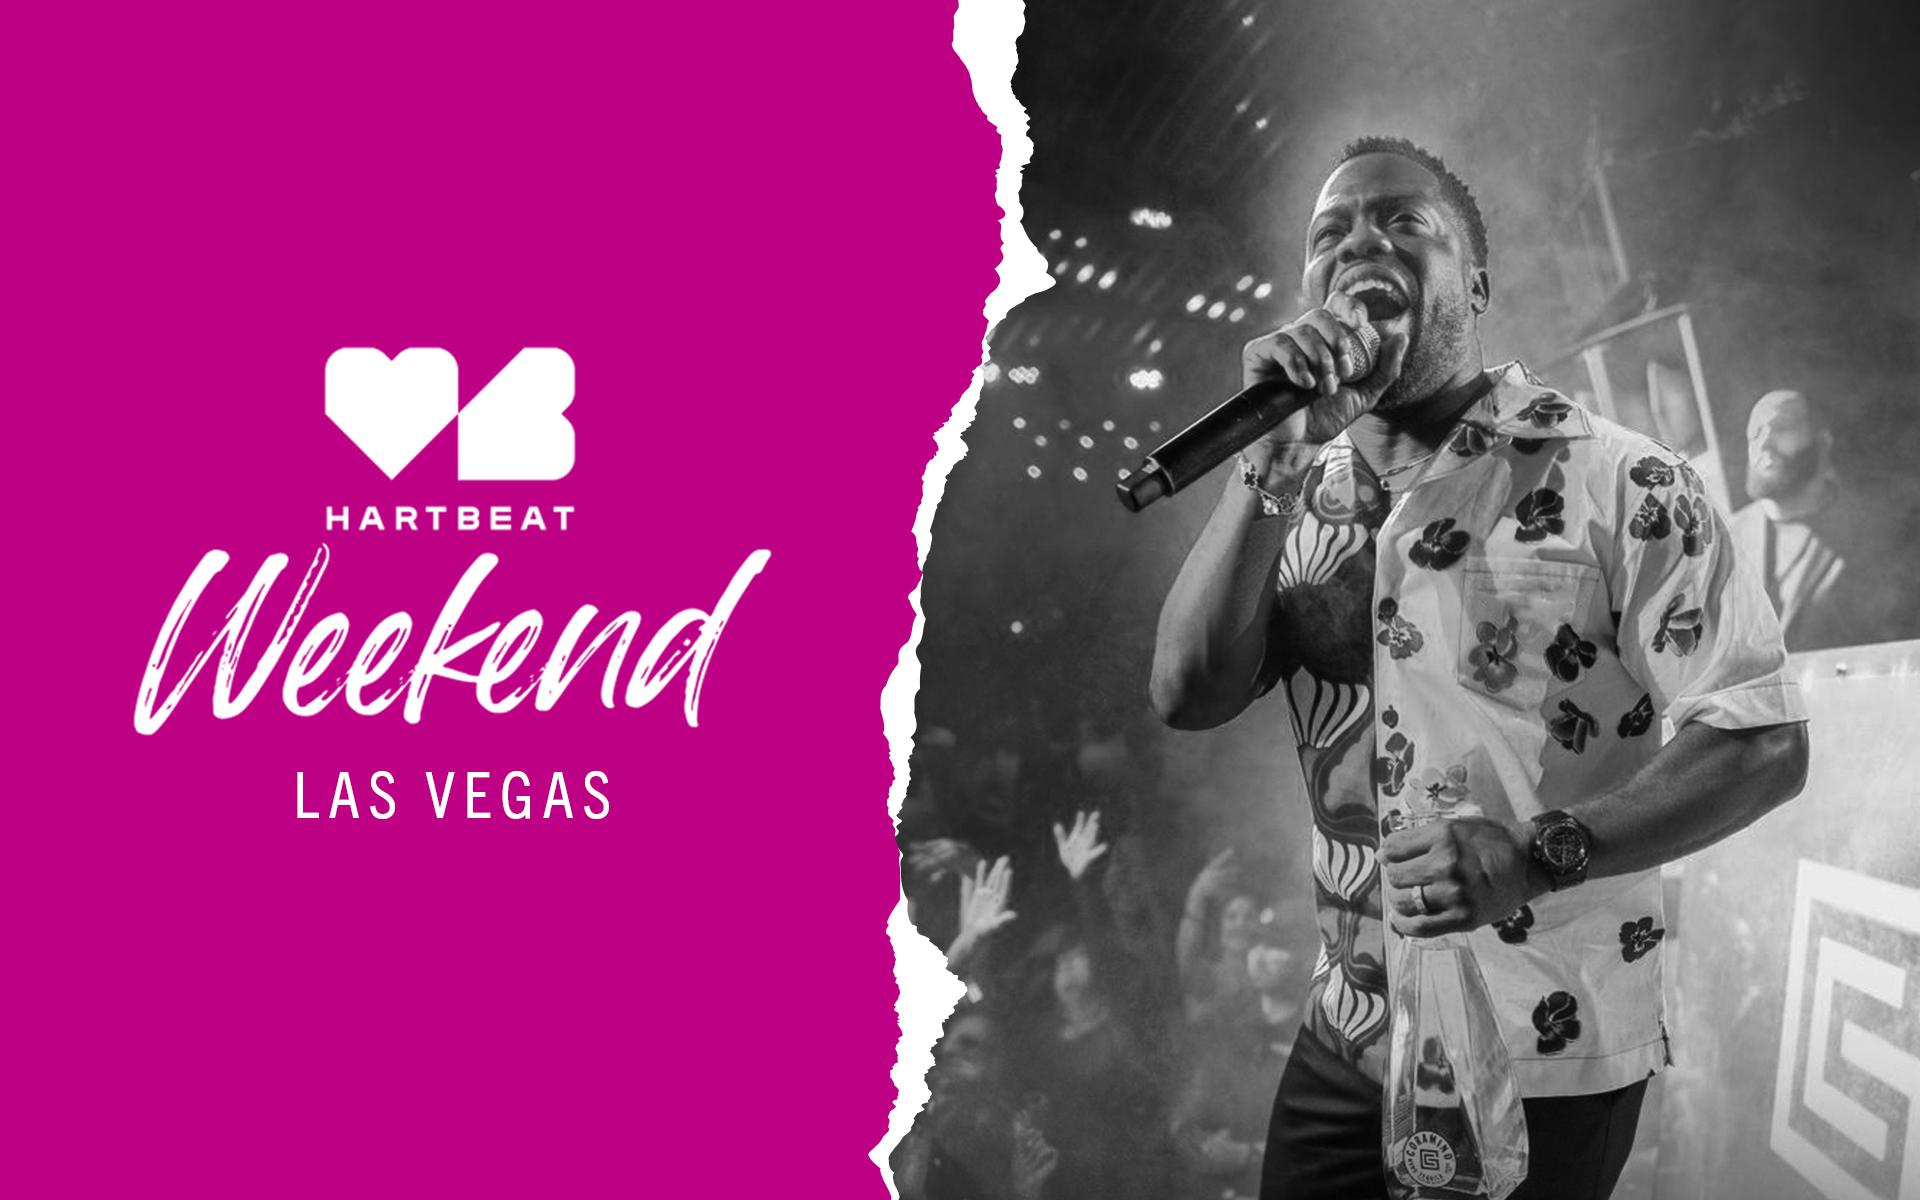 HARTBEAT WEEKEND RETURNS TO RESORTS WORLD LAS VEGAS, HOSTED BY KEVIN